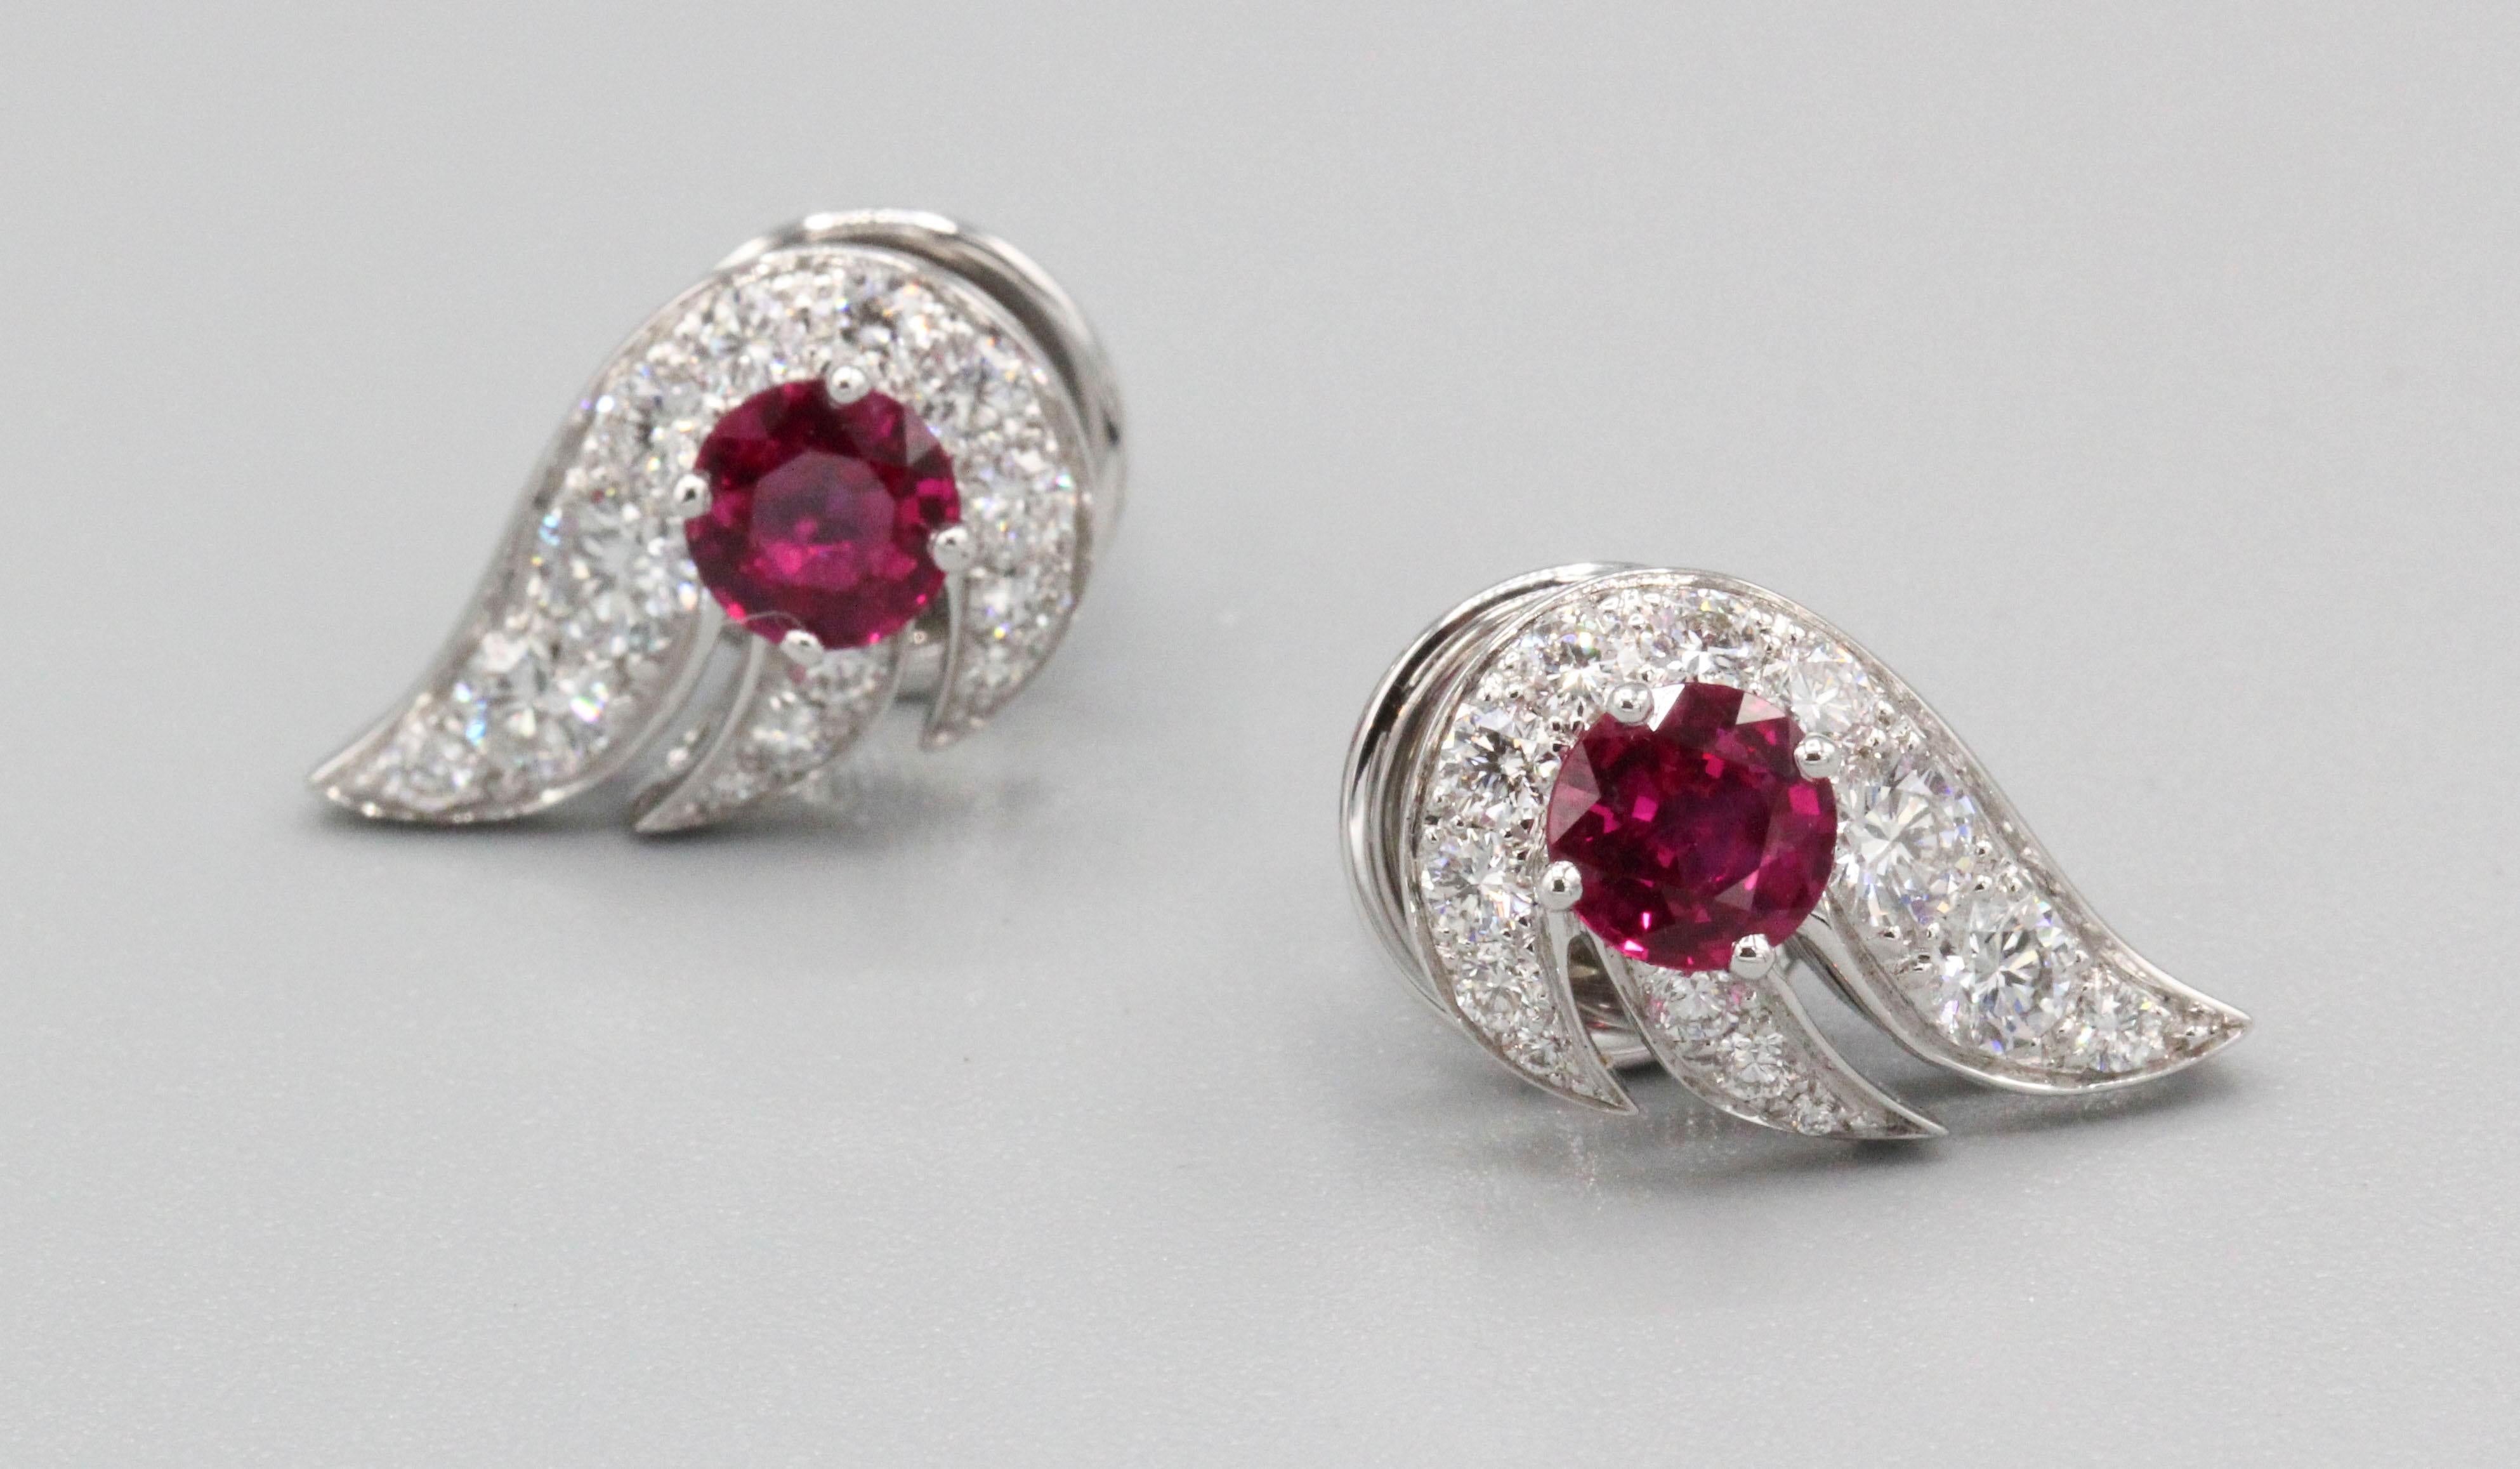 Fine pair of ruby and diamond earrings by Graff.  Set in 18k white gold.


Hallmarks: Graff, AU750, reference numbers, English gold assay mark